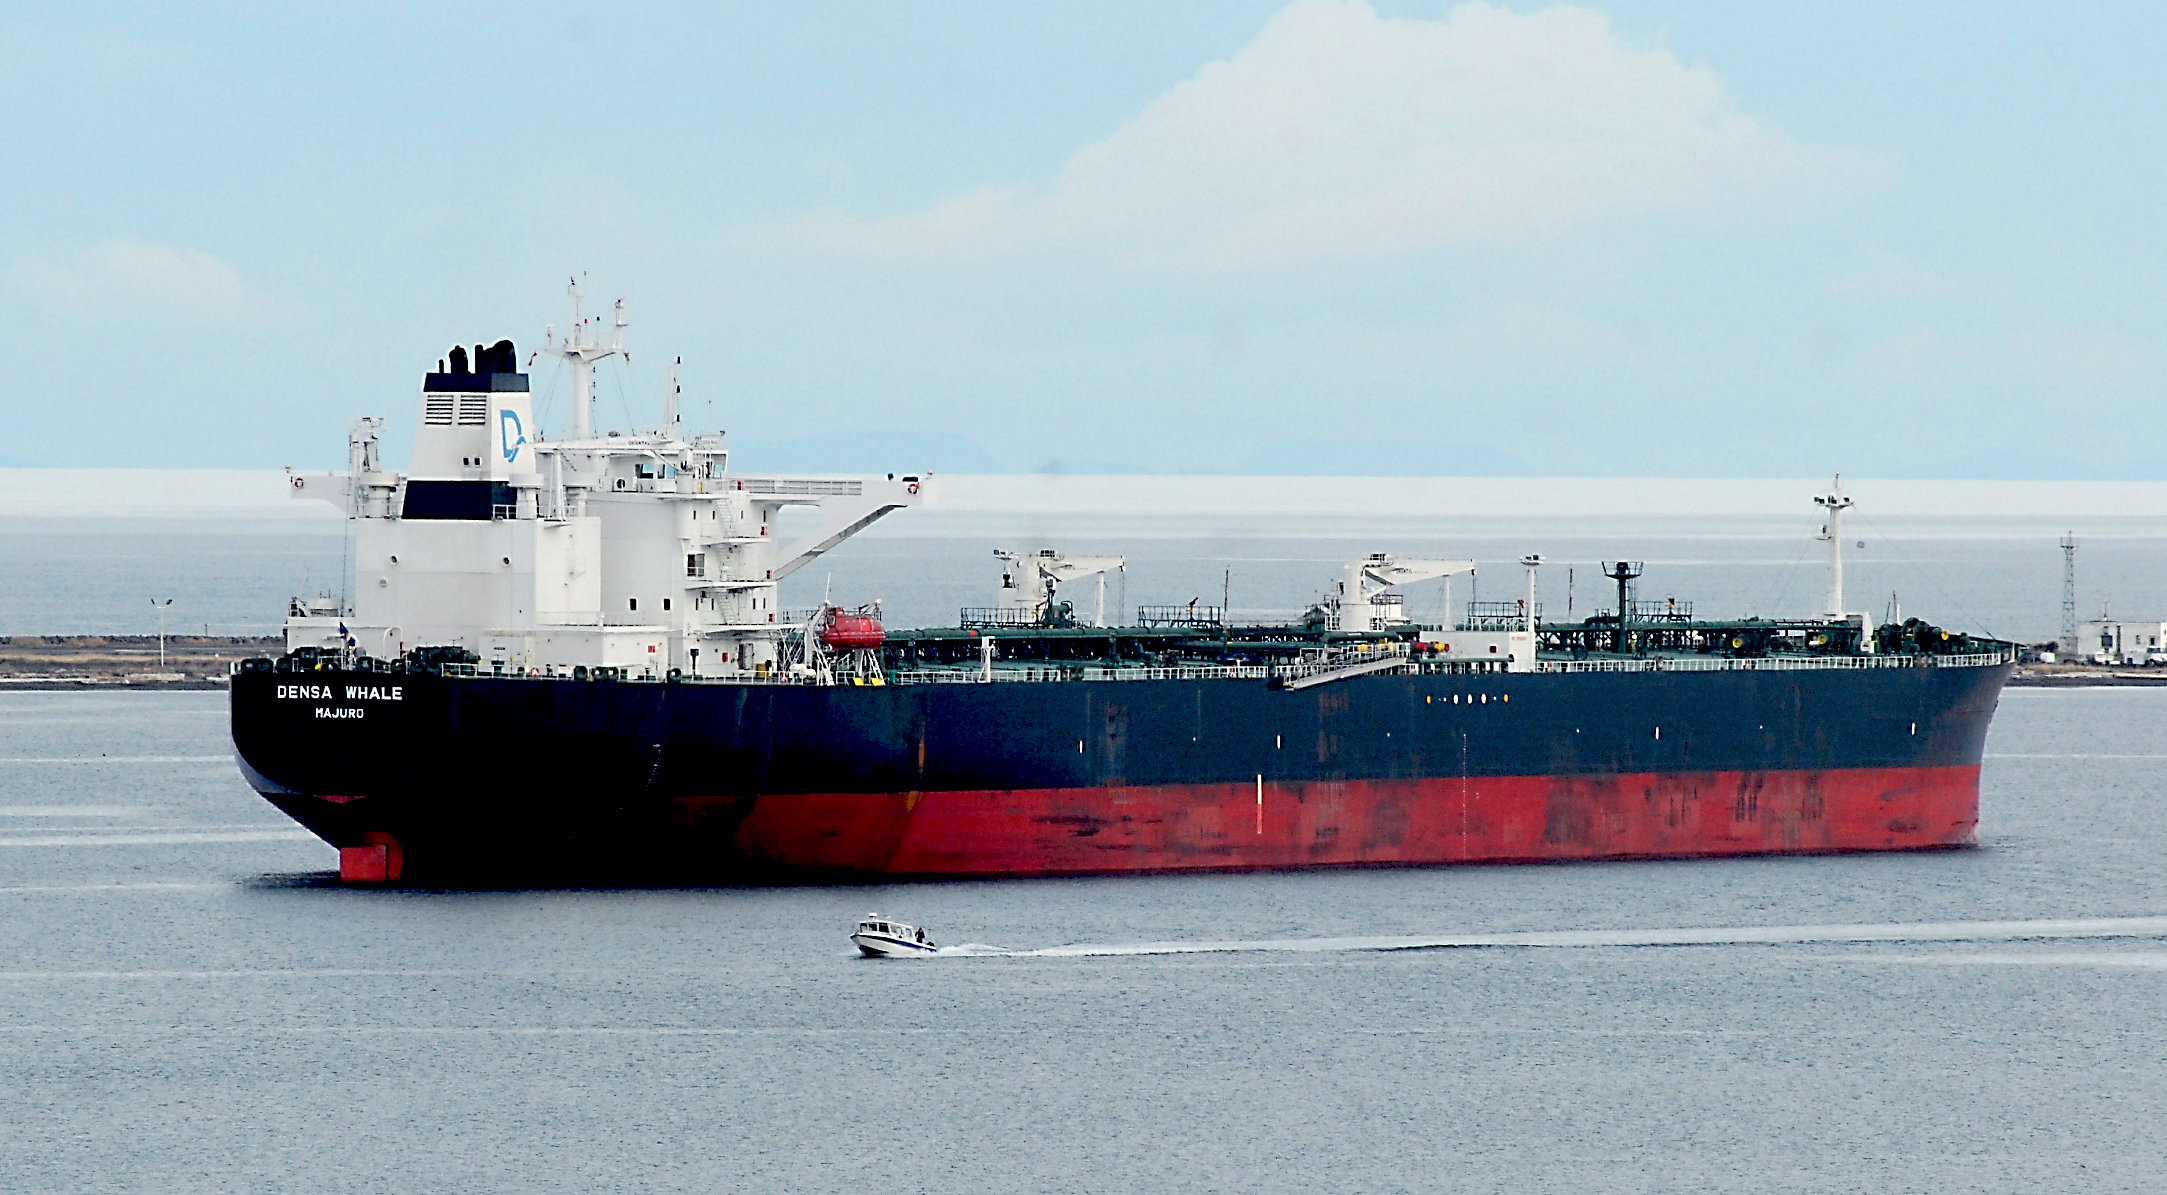 The Marshall Islands-flagged tanker ship Densa Whale sits anchored in Port Angeles Harbor on Saturday after visiting BP's Cherry Point refinery earlier in the week. Tankers servicing Canadian oil could add to traffic on the Strait of Juan de Fuca north of the border.  —Photo by Keith Thorpe/Peninsula Daily News